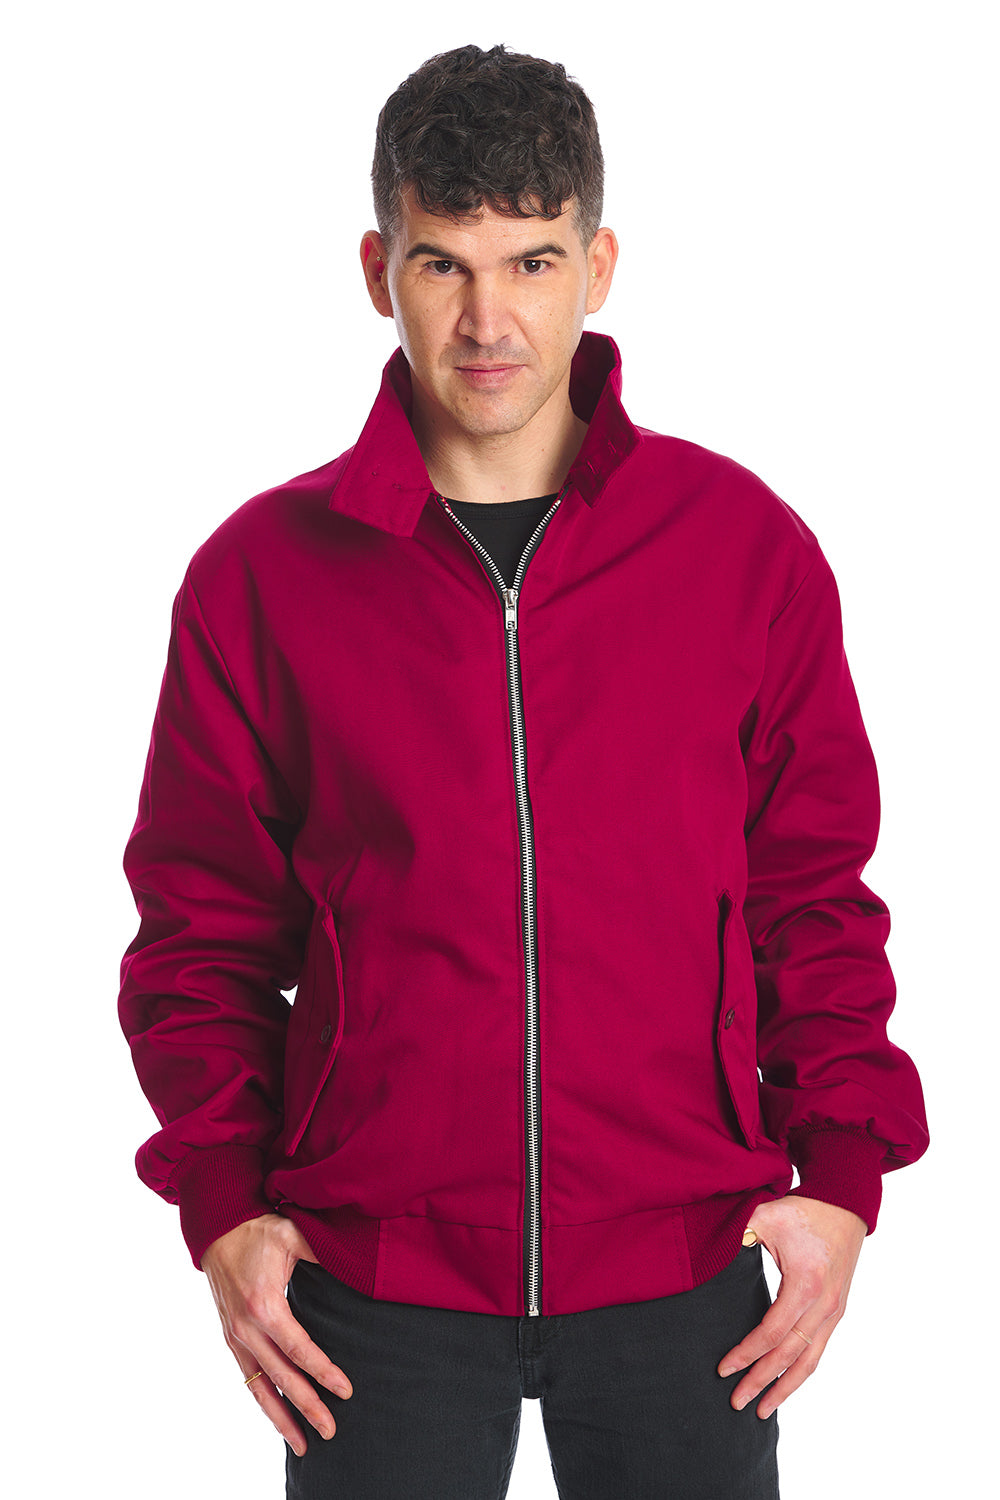 Male model in red bomber jacket